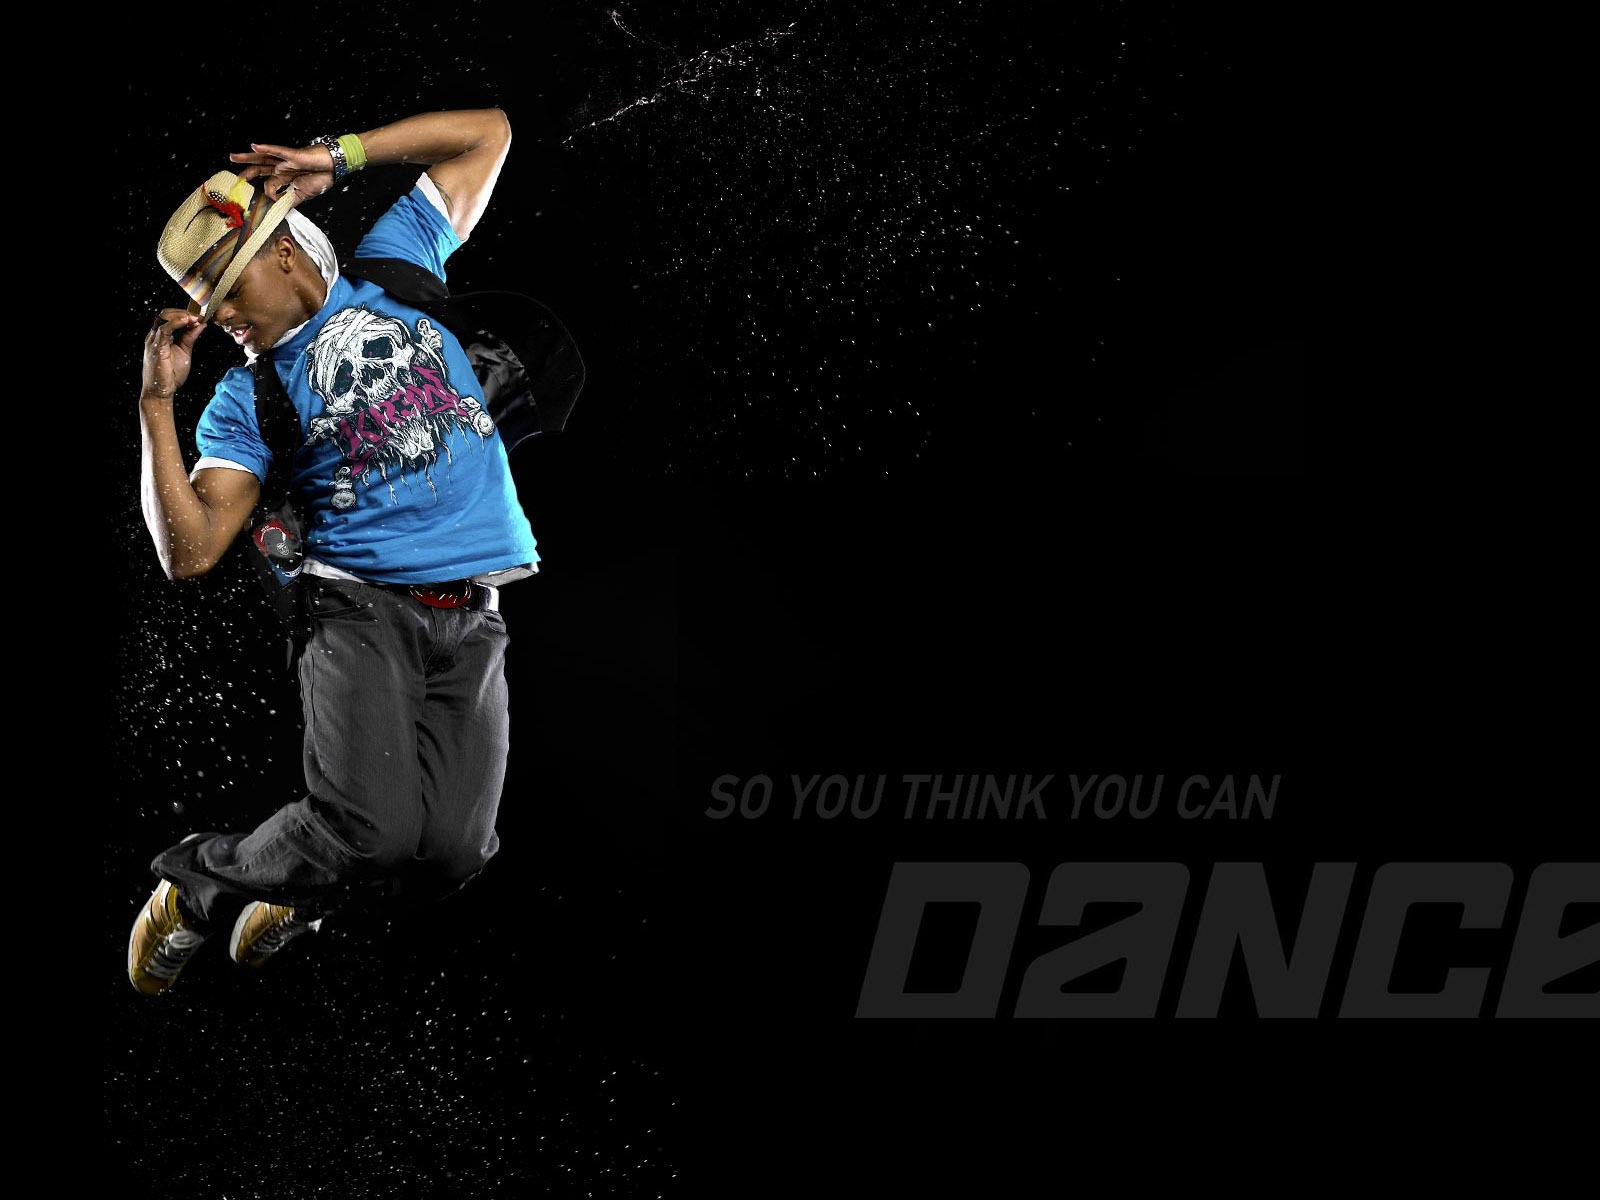 So You Think You Can Dance wallpaper (1) #20 - 1600x1200